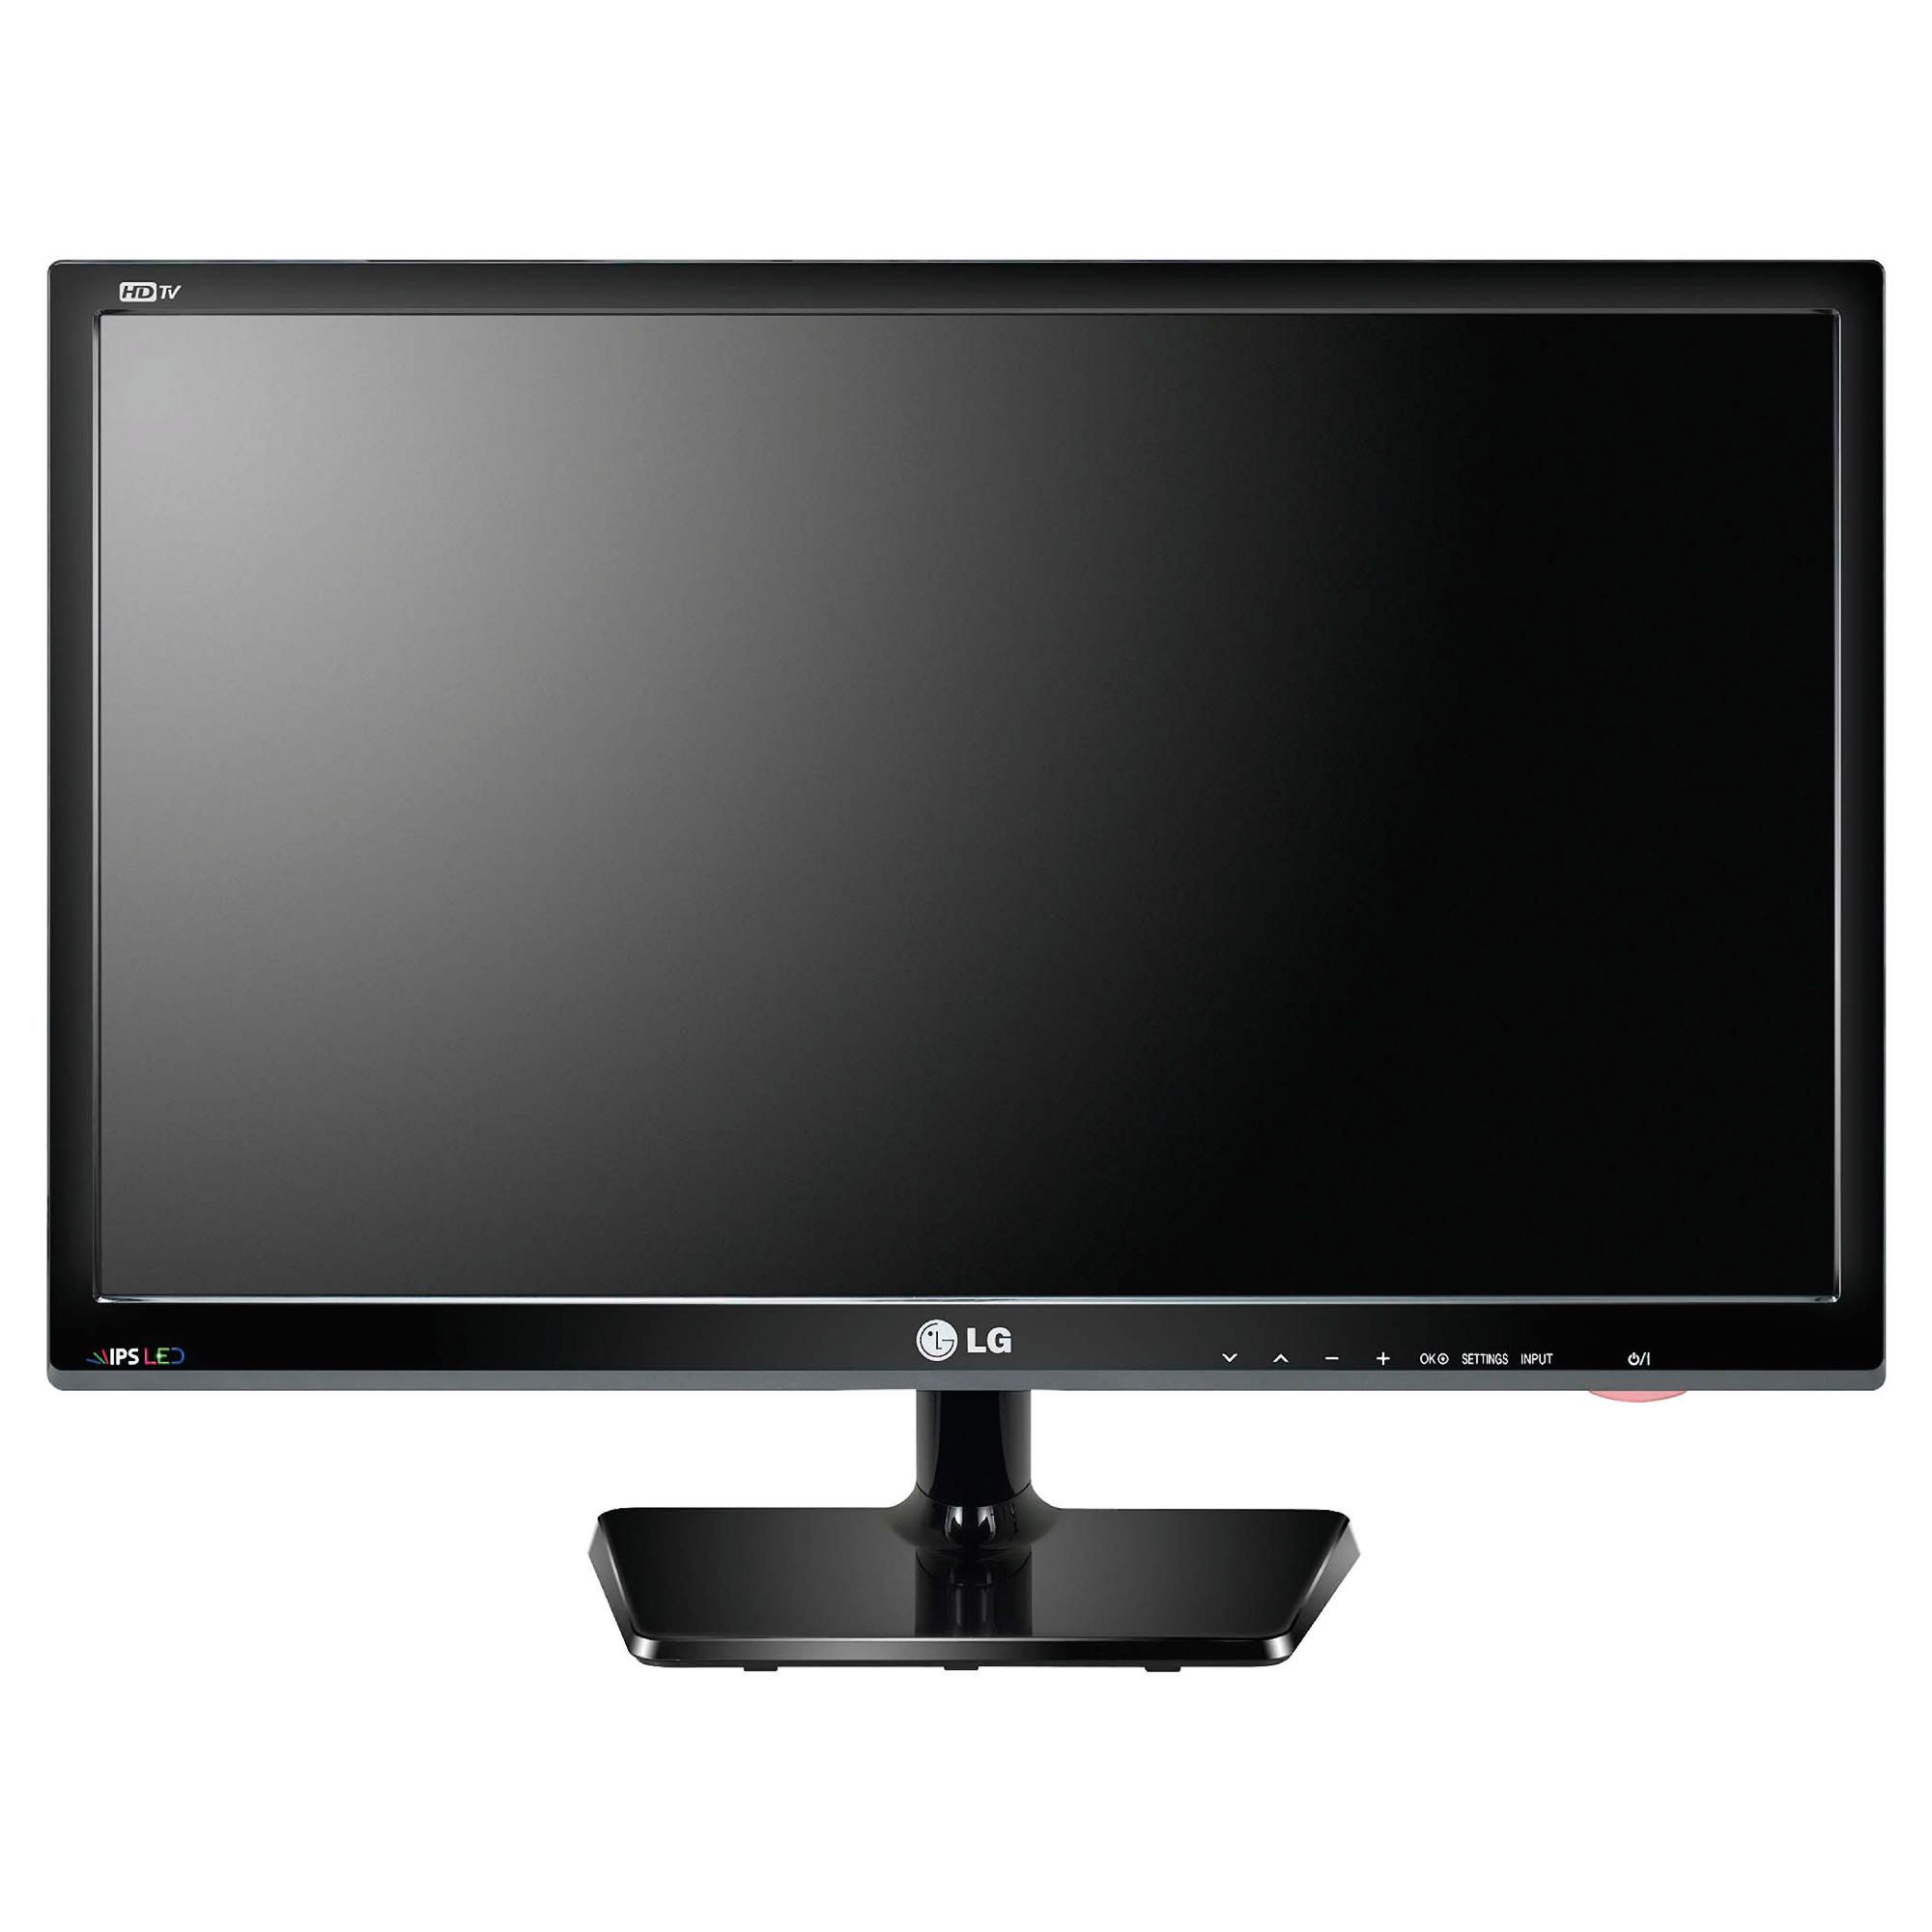 LG 26MA33D 26 inch HD Ready 720P LED TV with Freeview